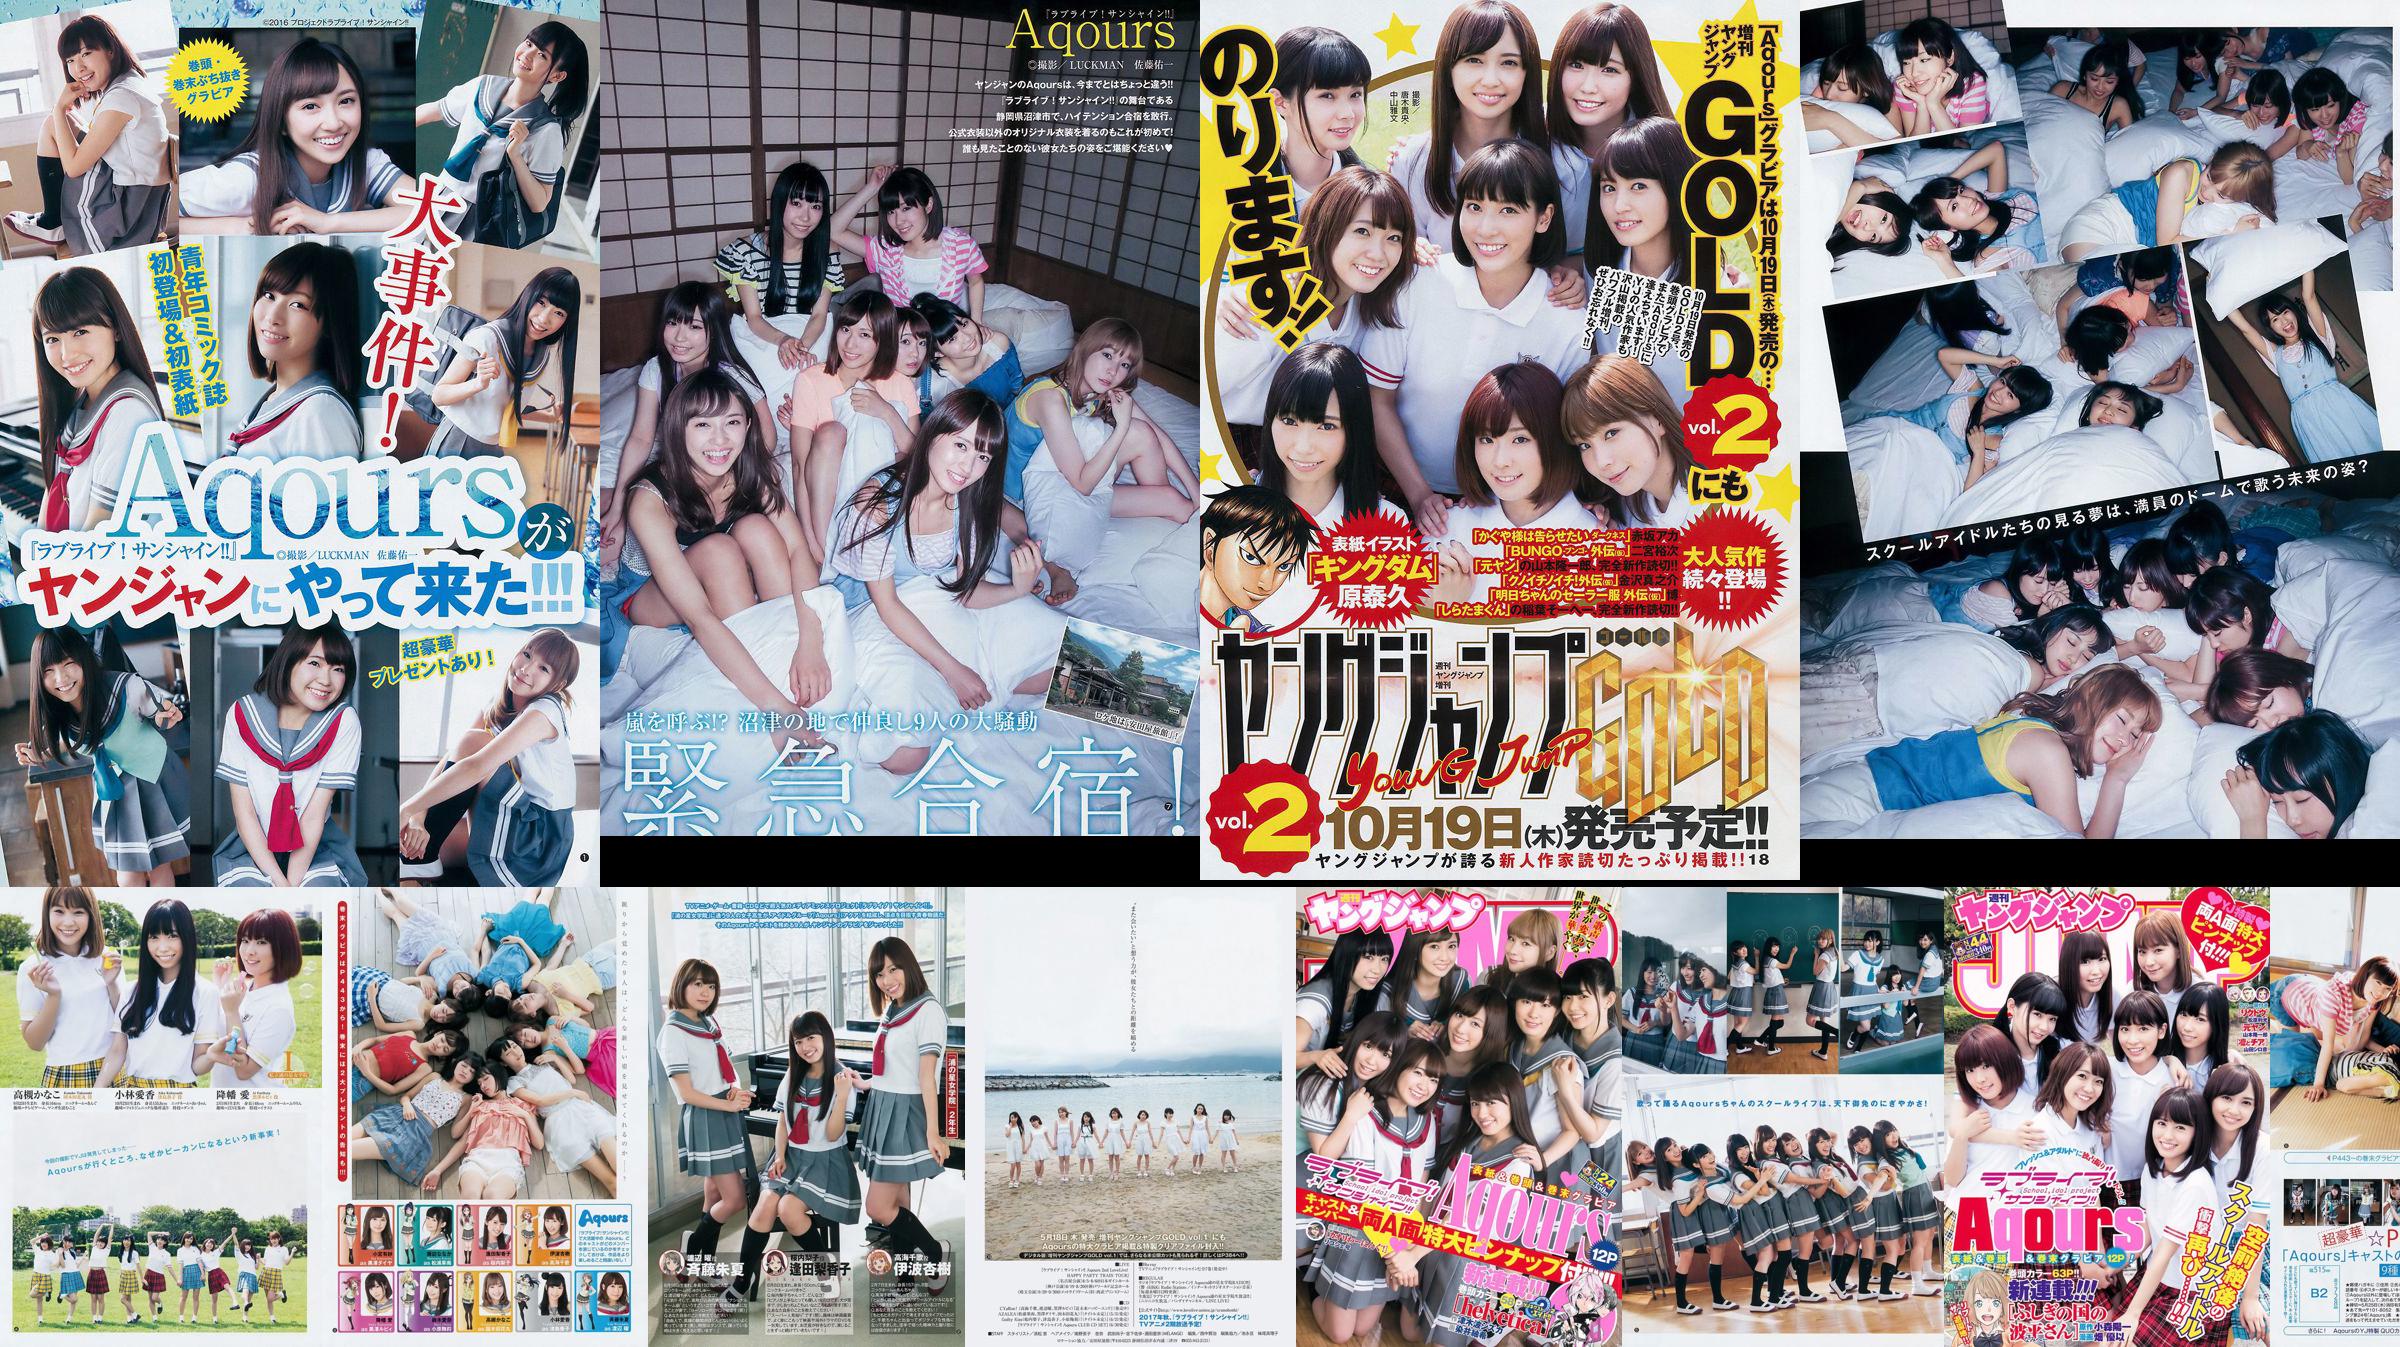 Japan Combination Aqours [Weekly Young Jump] 2017 No.44 Photo Magazine No.841b9a หน้า 2